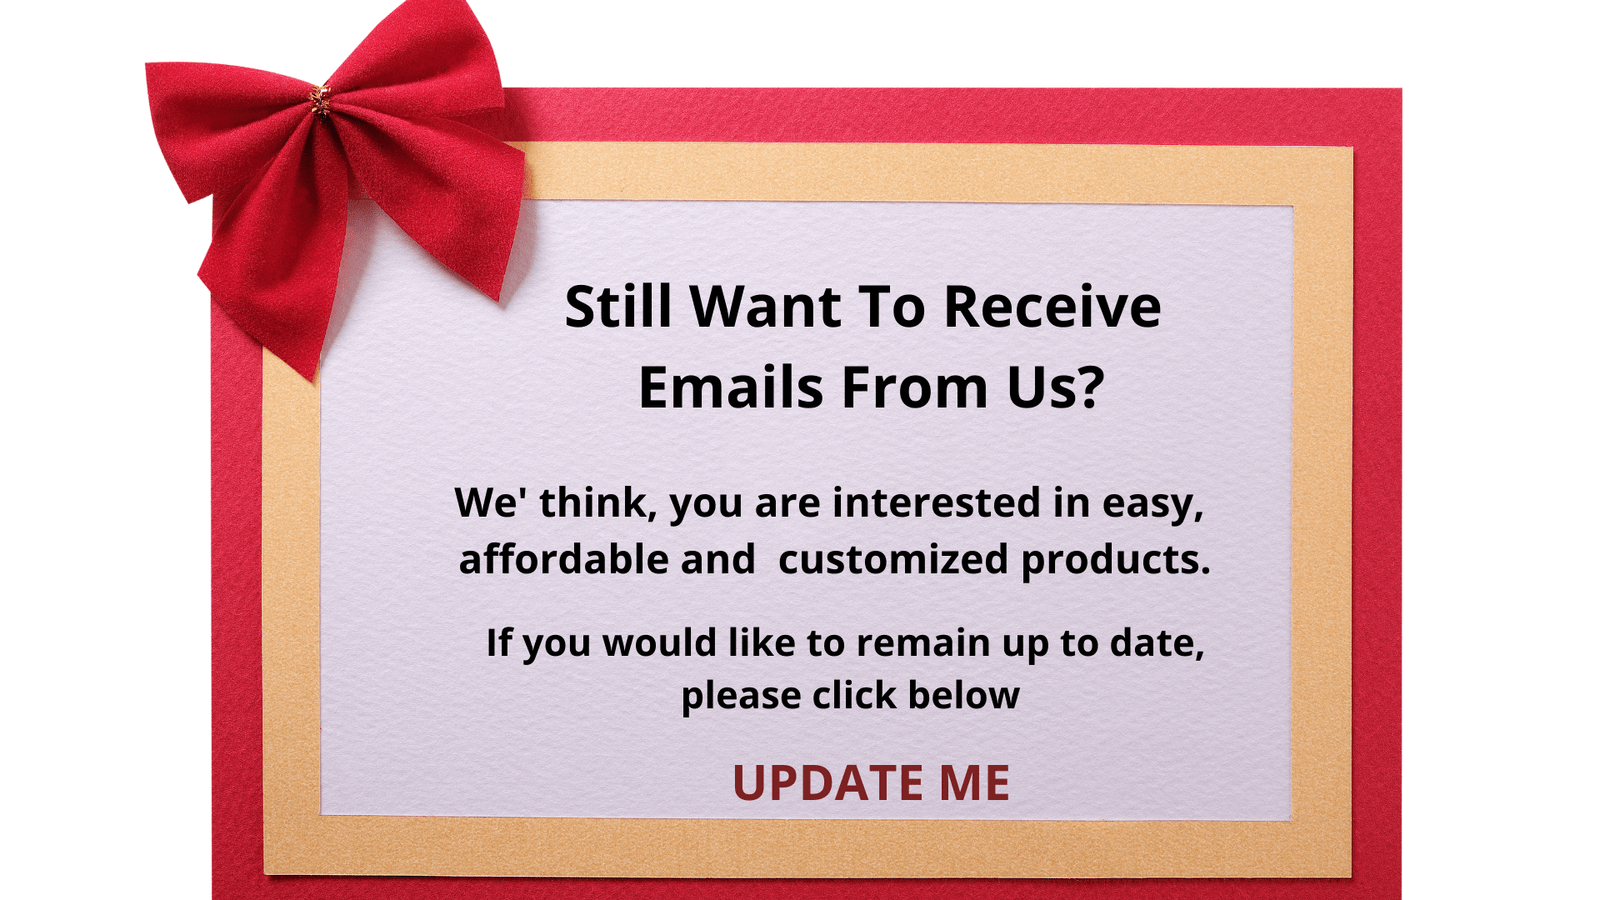 Still Want To Receive Emails From Us